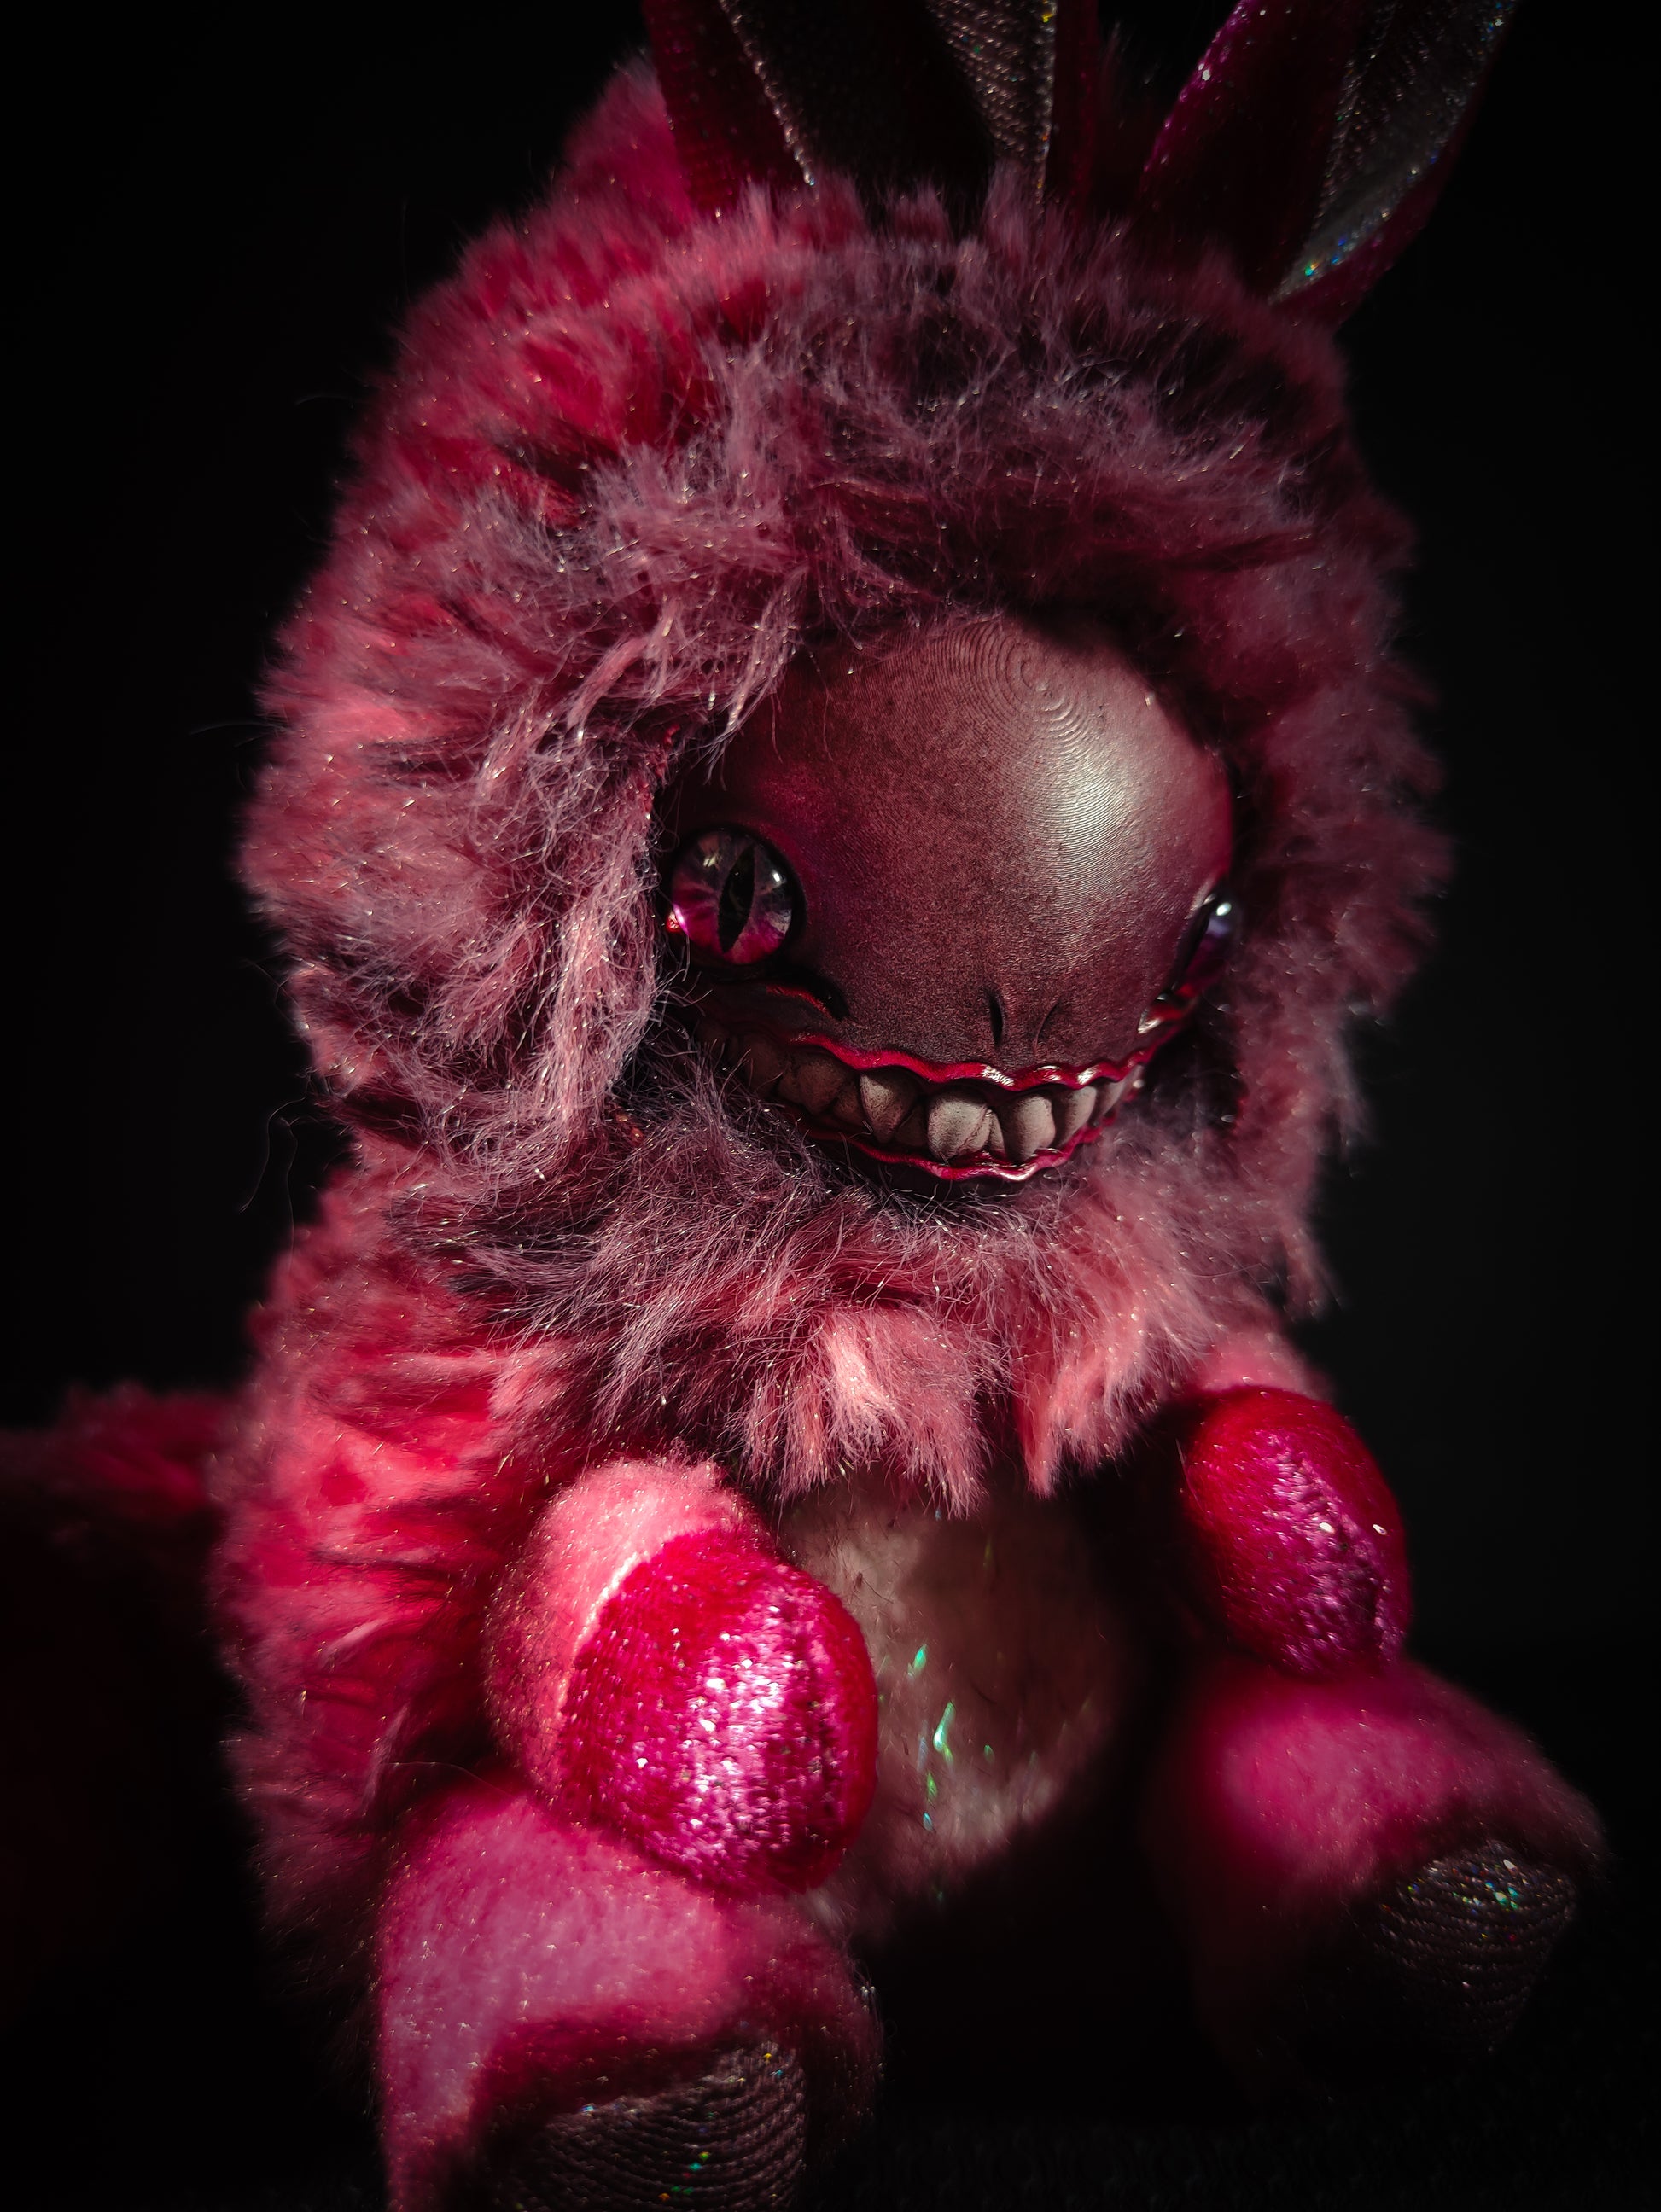 FRIEND Candy Terror Flavour - Cryptid Art Doll Plush Toy